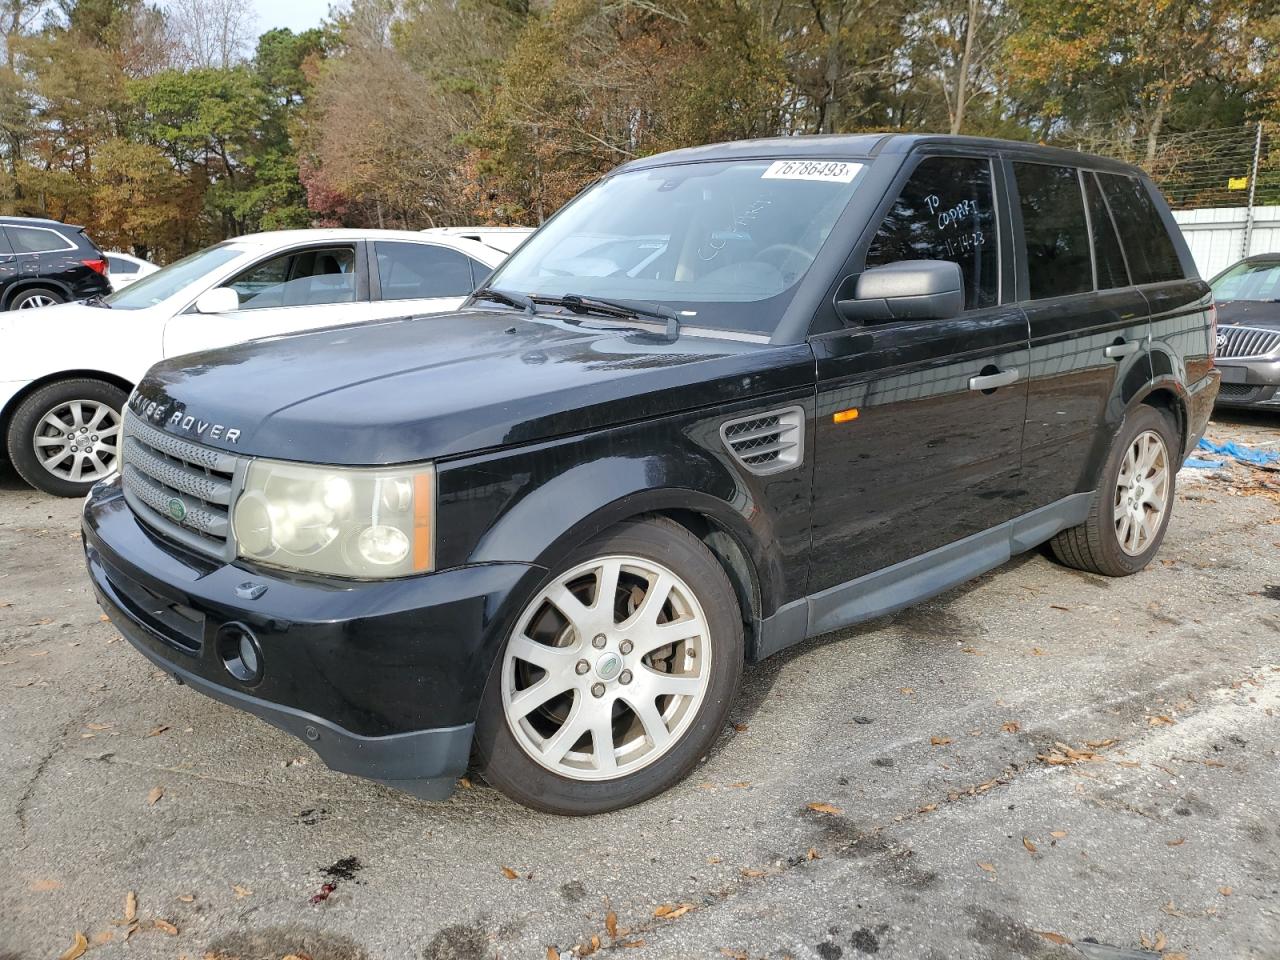 vin: SALSF25437A992890 SALSF25437A992890 2007 land rover range rover 4400 for Sale in 30168, Ga - Atlanta West, Austell, USA